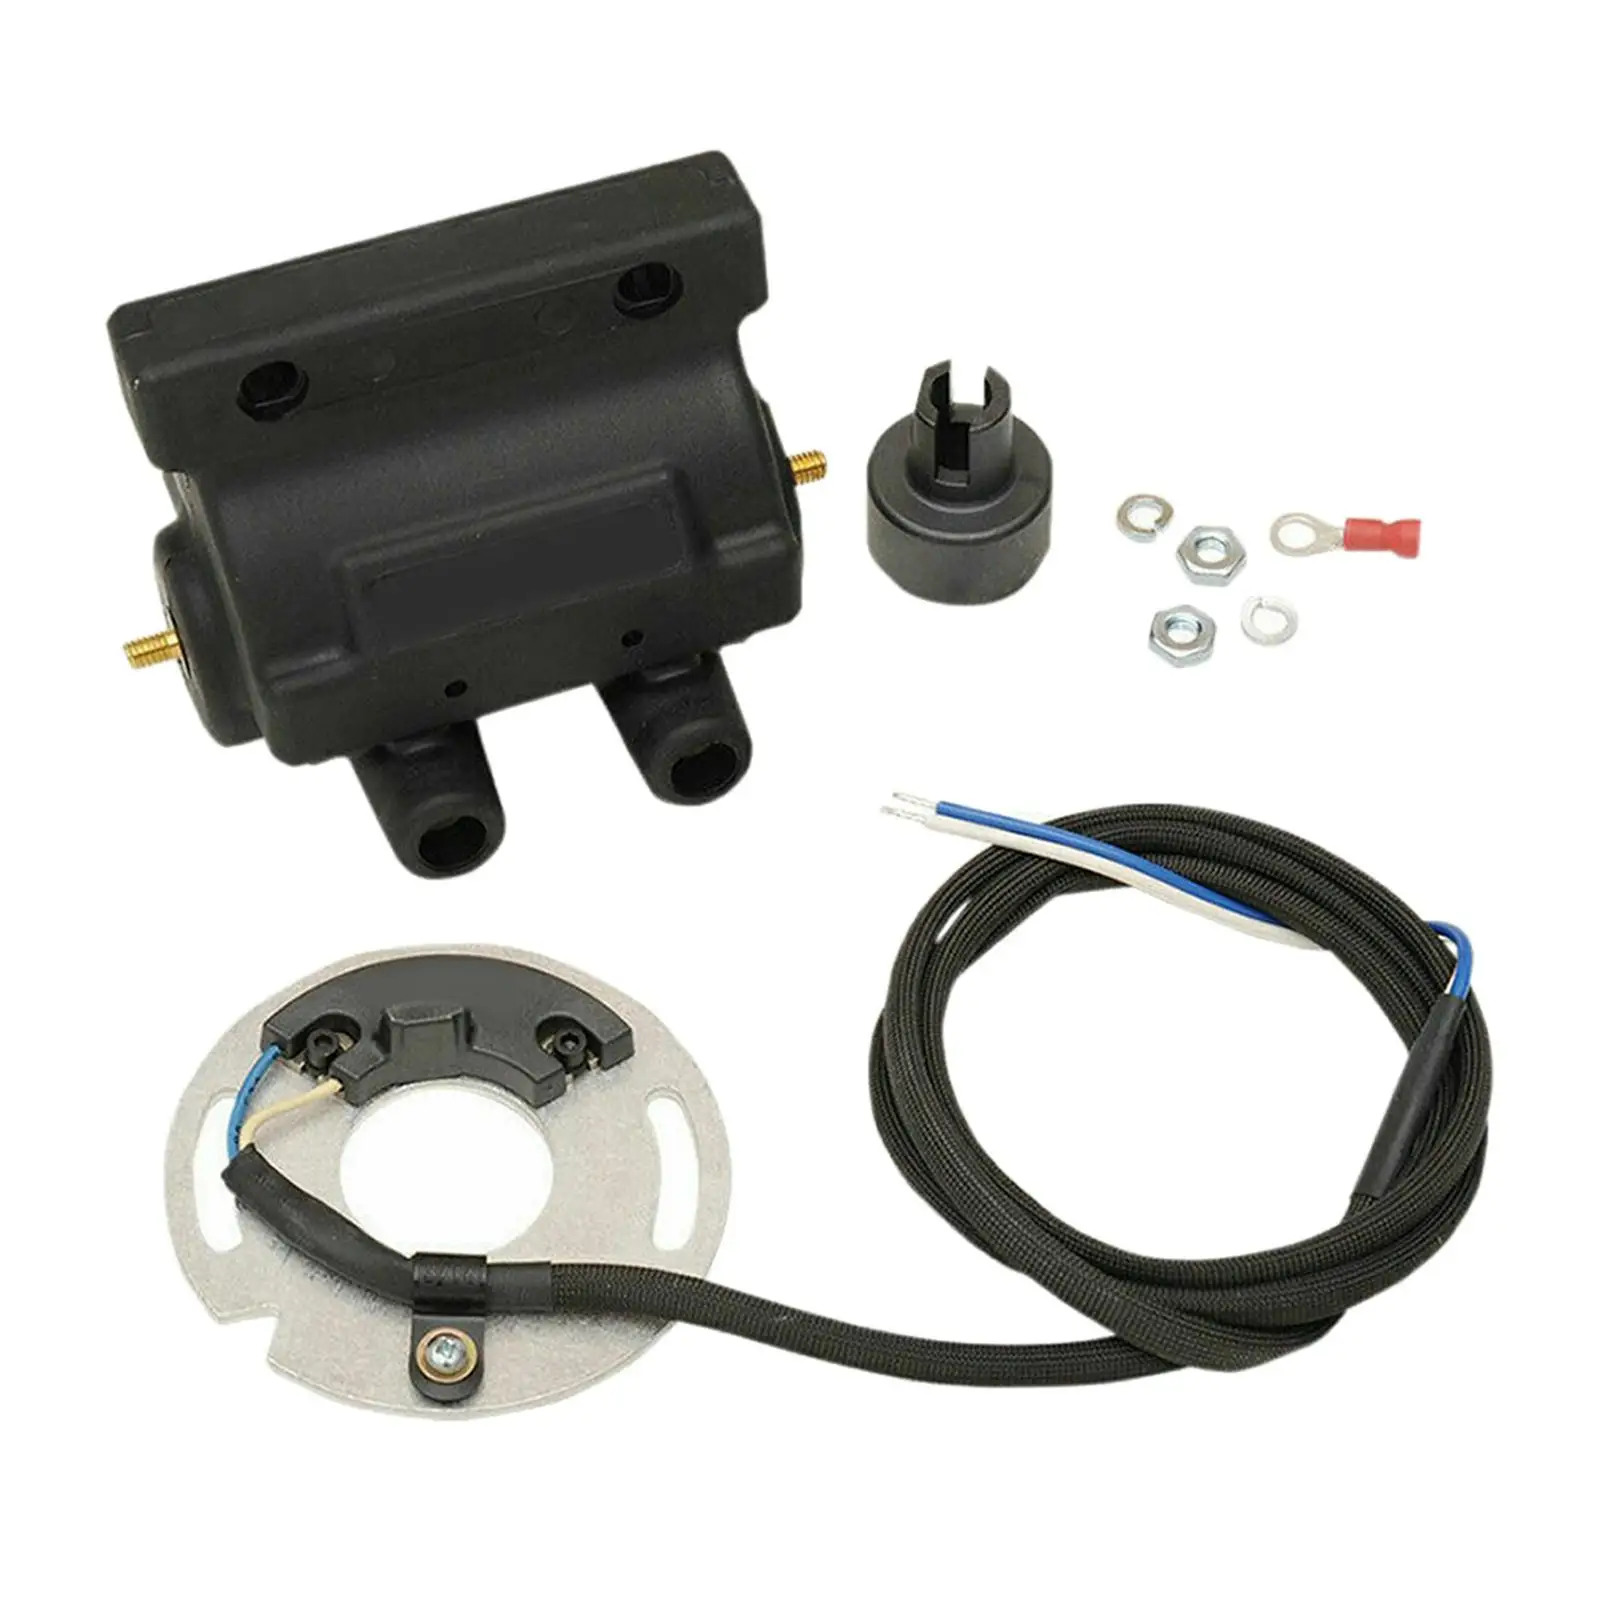 Ignition Dyna S Dual Fire Dsk61 Supplies Replaces Stable Performance Includes DC71 Coil Kit Accessories for Harley Davidson